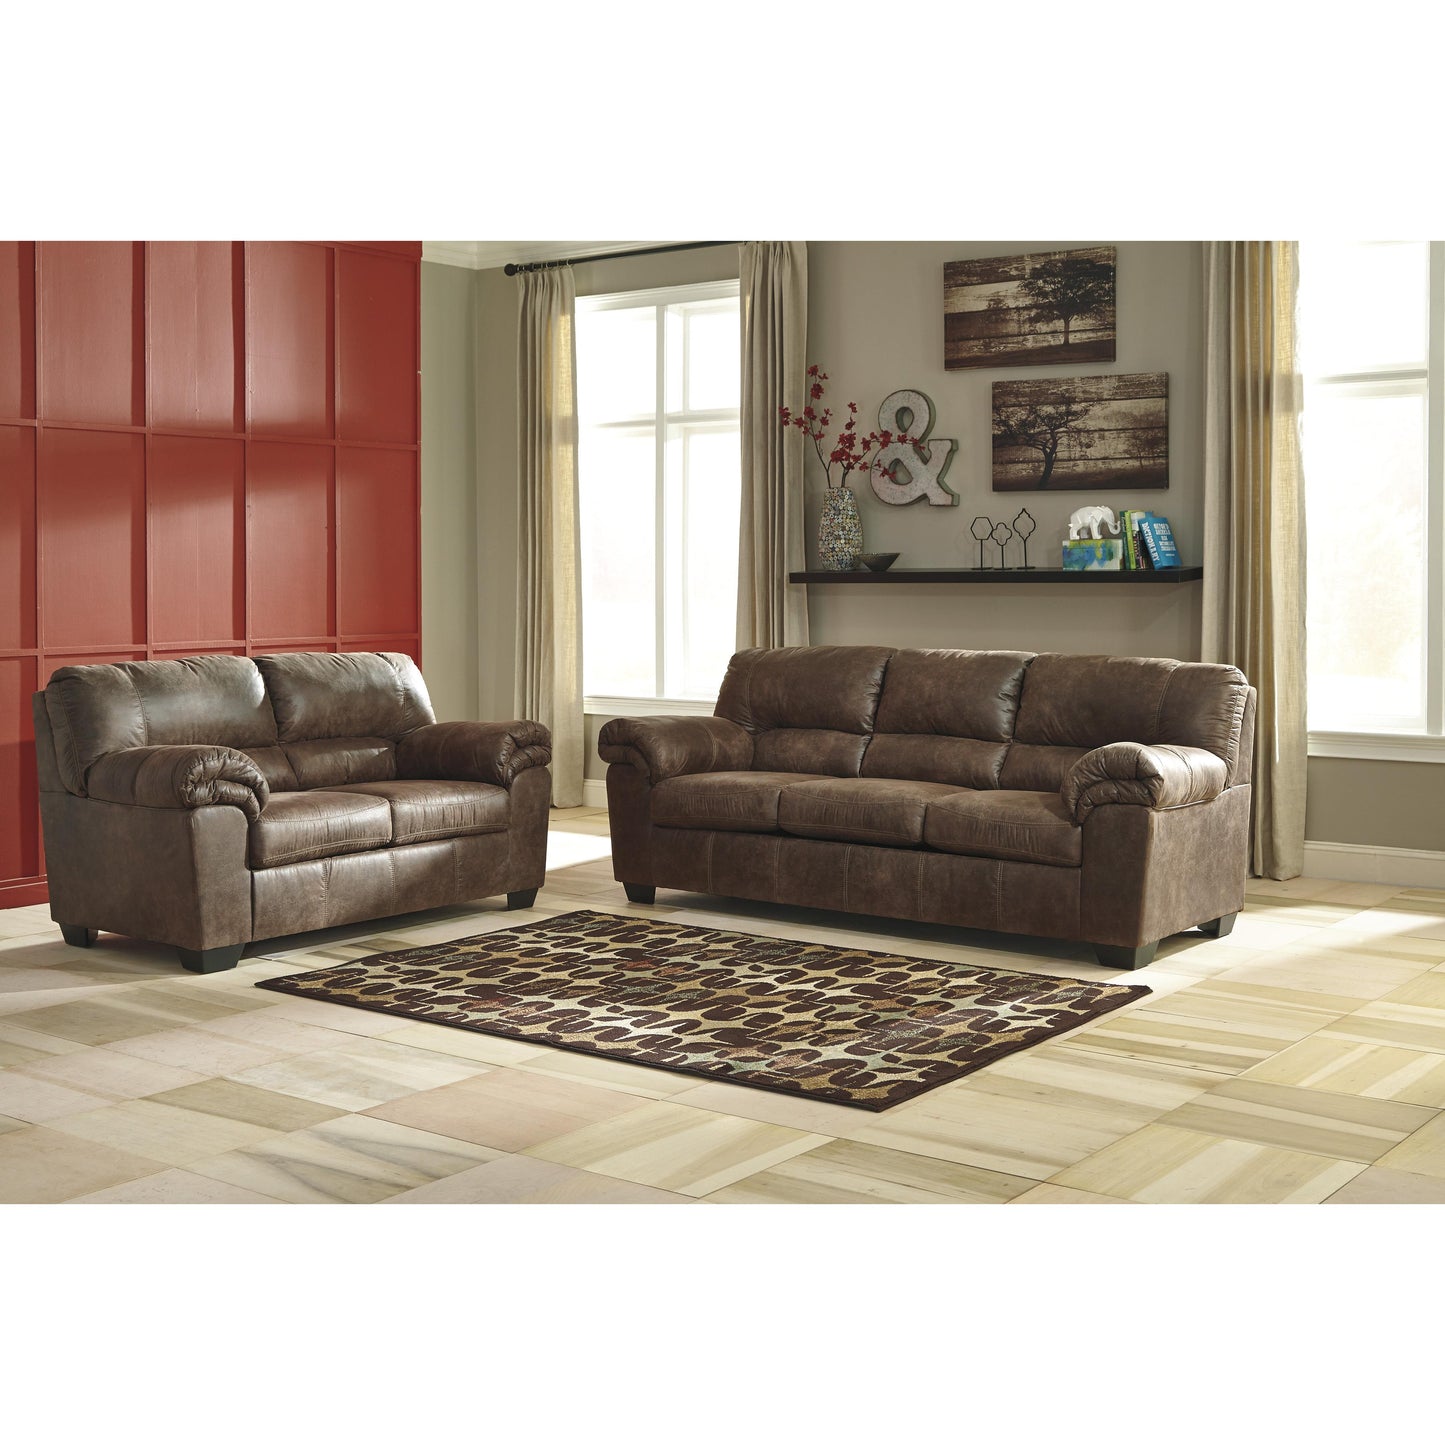 Signature Design by Ashley Bladen Stationary Leather Look Sofa 1202038